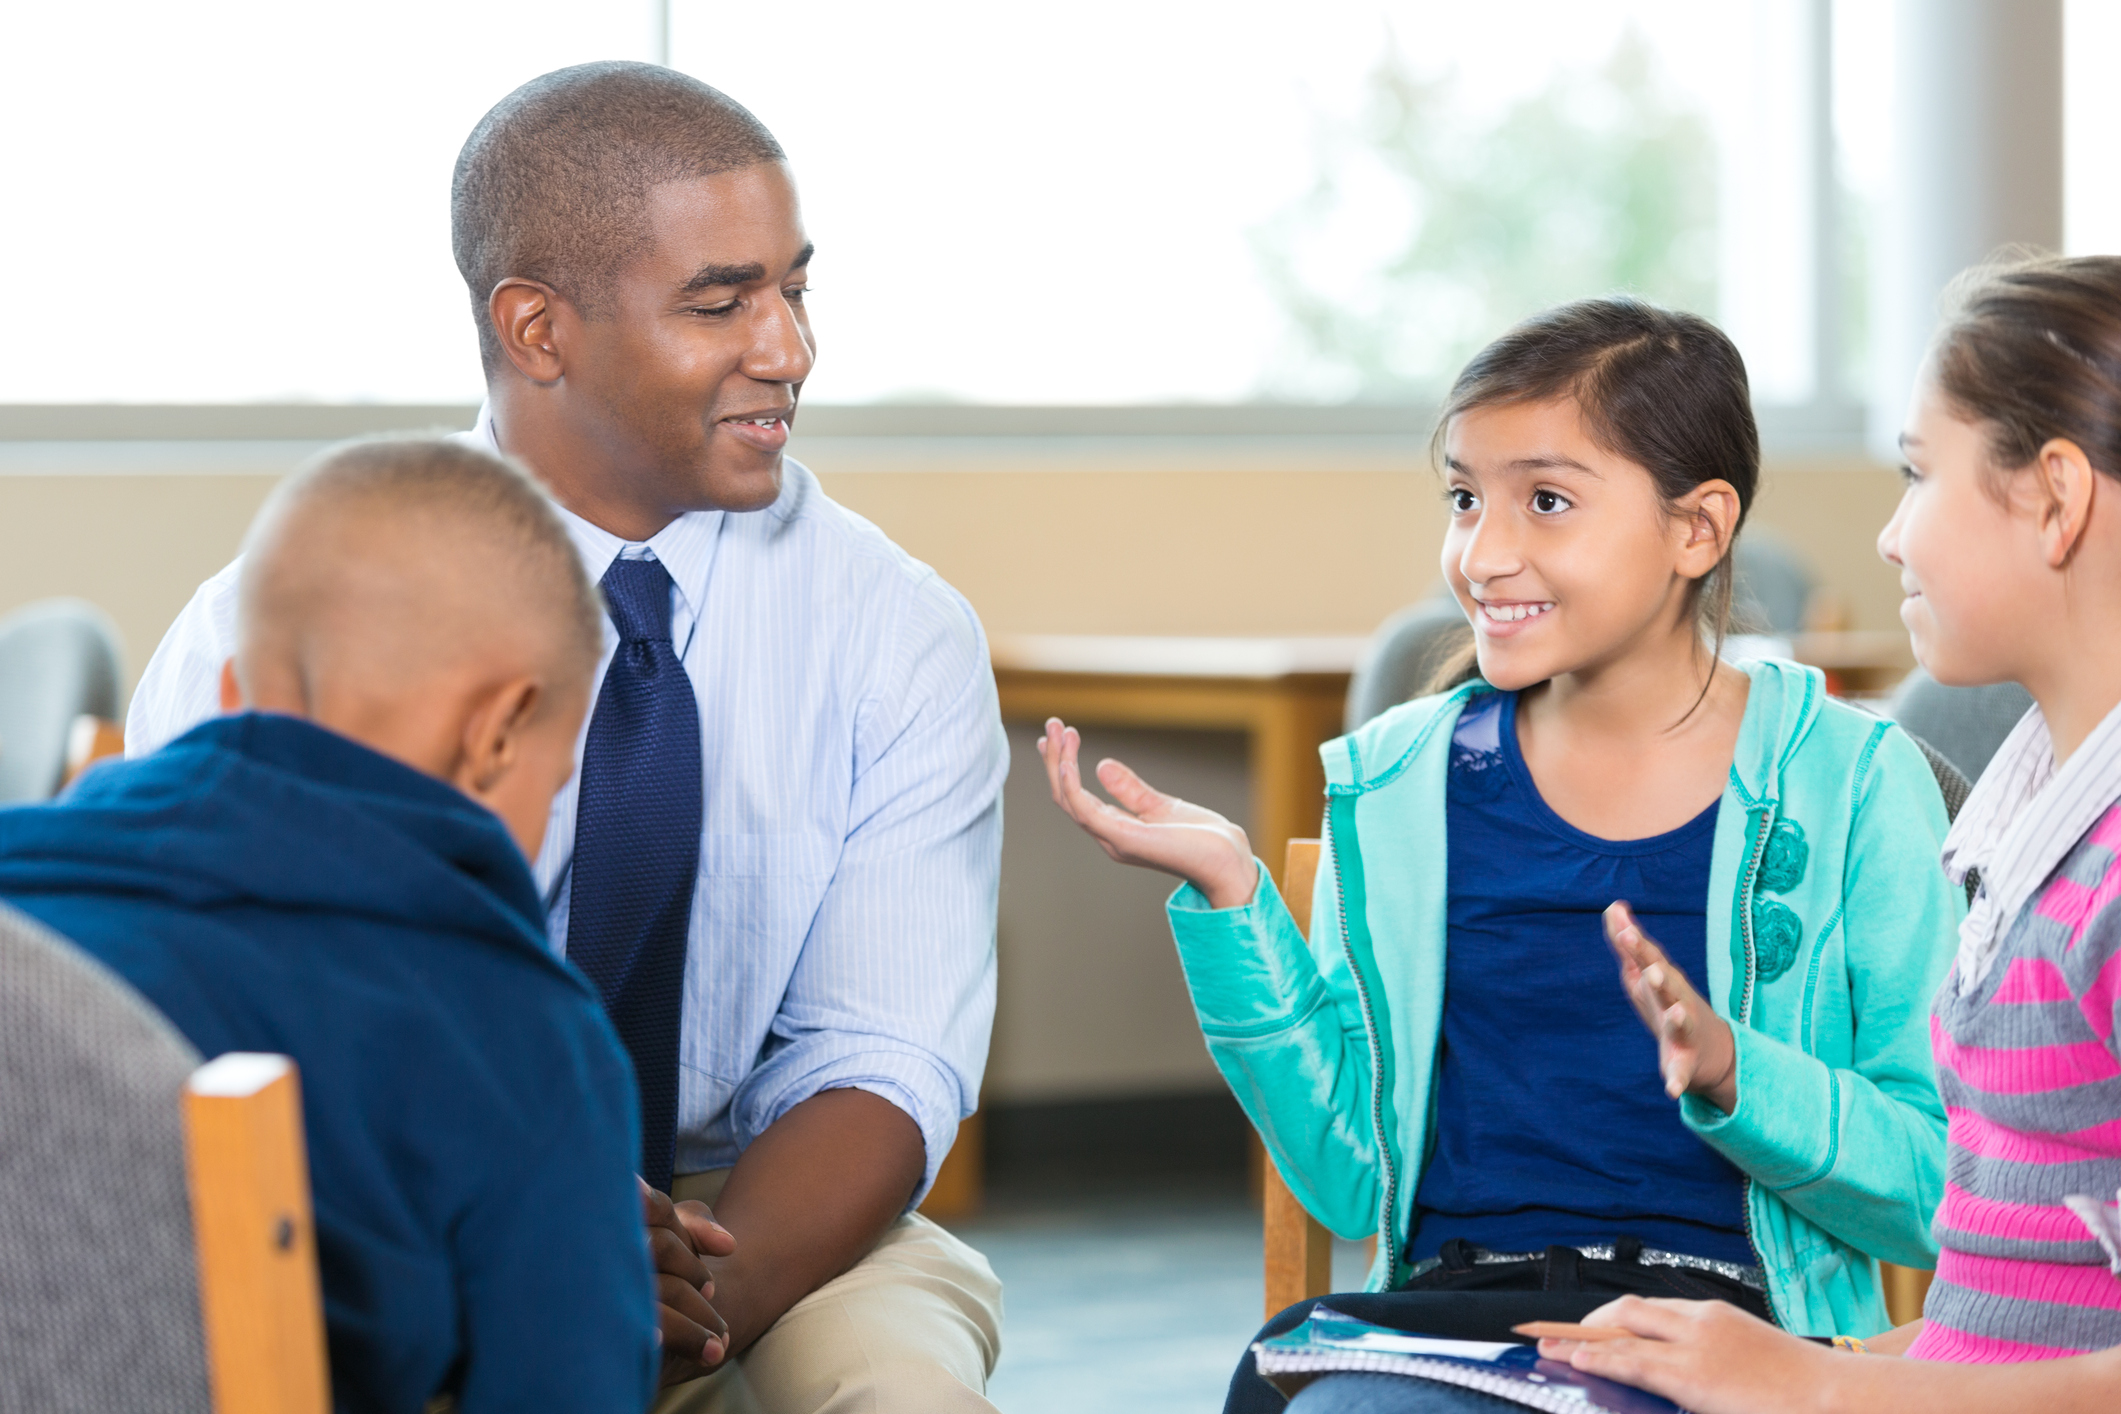 Elementary age kids talking to counselor during group therapy session